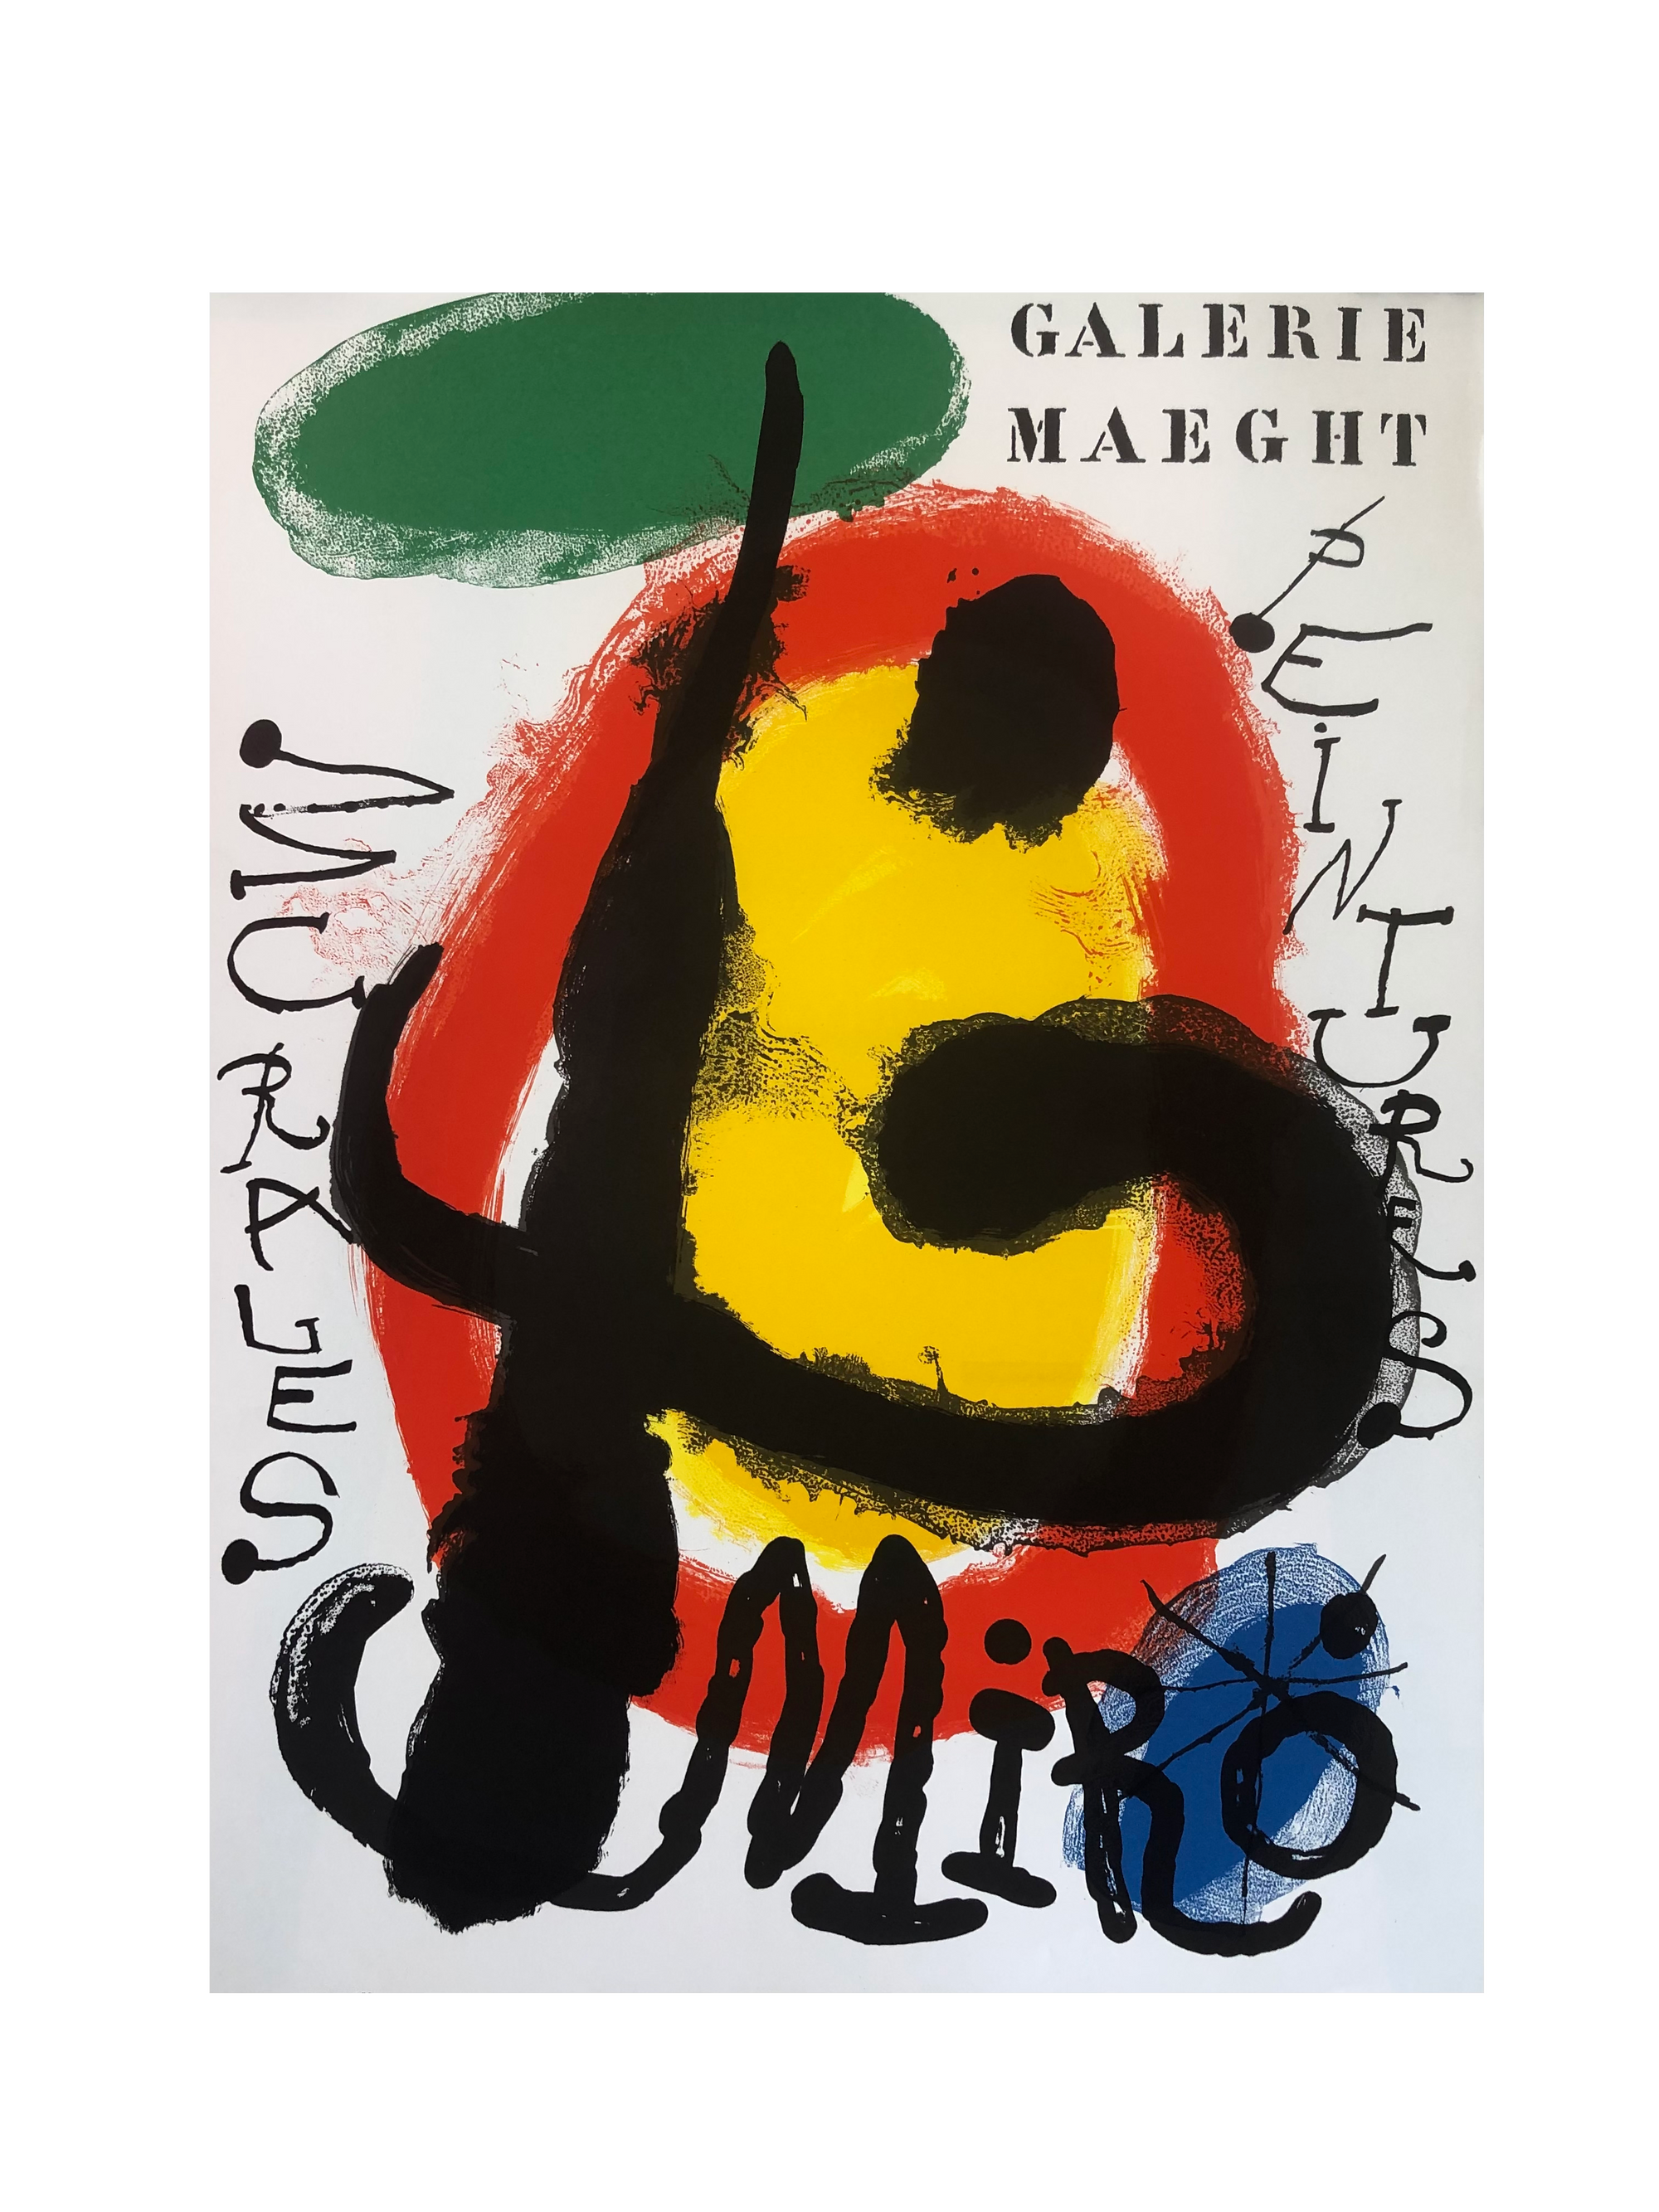 Galerie Maeght Miro Exhibition Poster